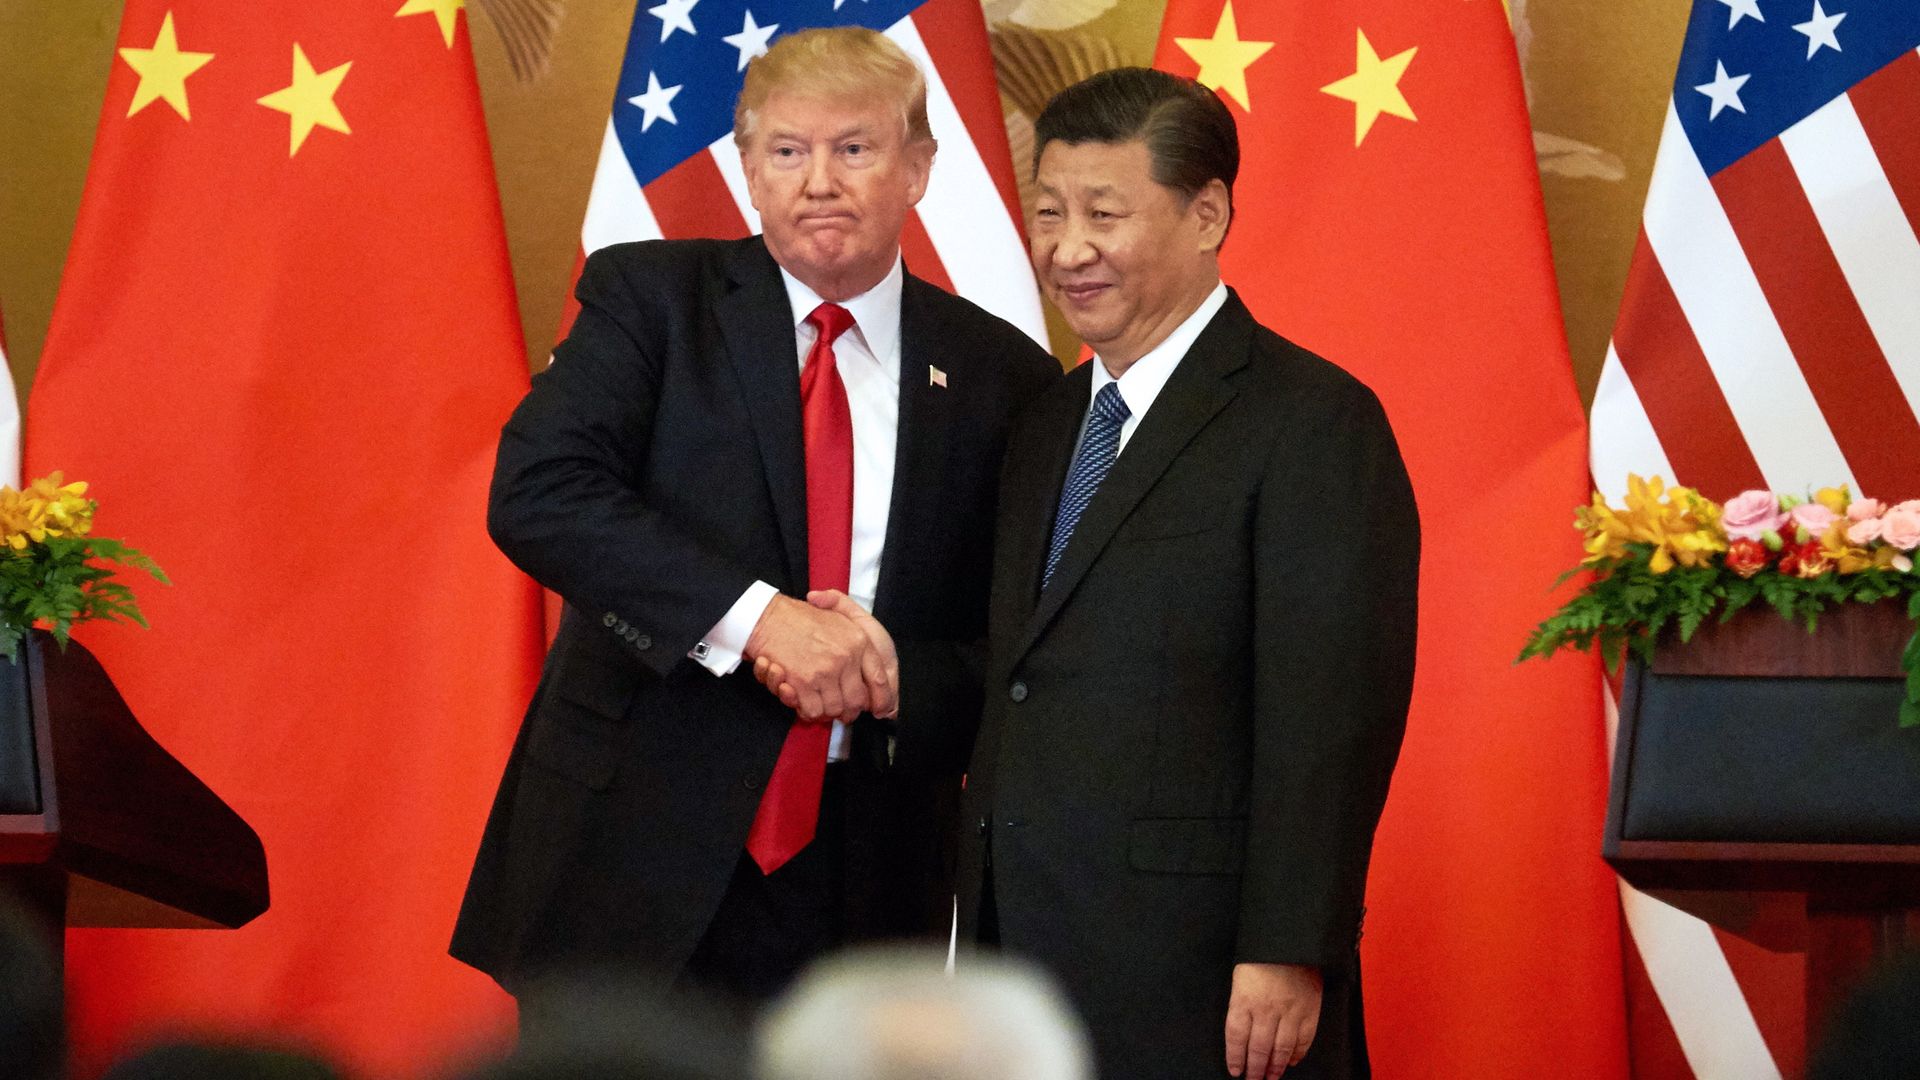 President Trump shakes hands with Chinese president Xi